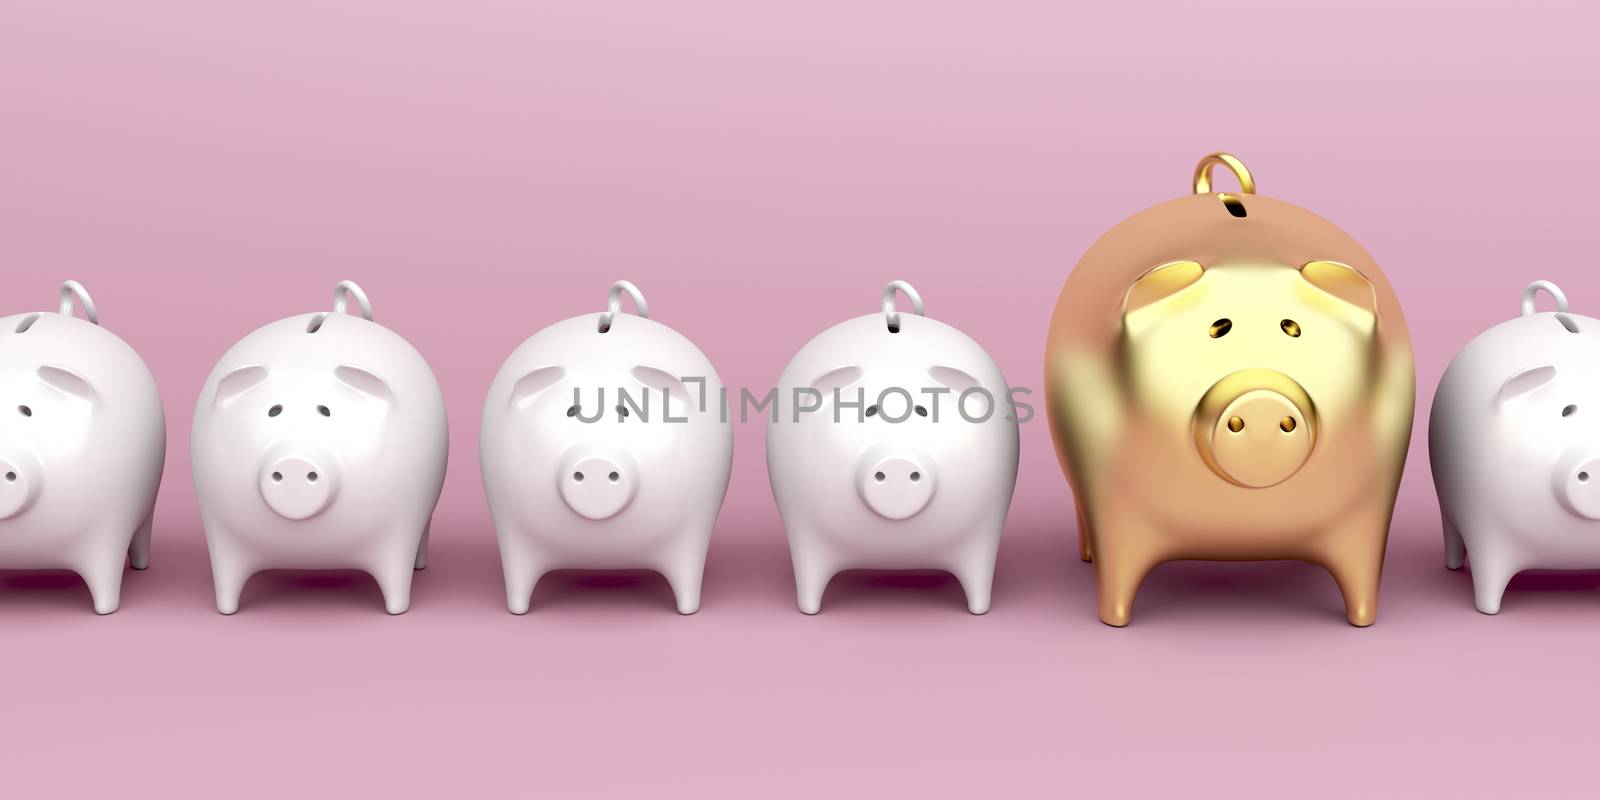 Row with piggy banks with one bigger and gold colored piggy bank, front view